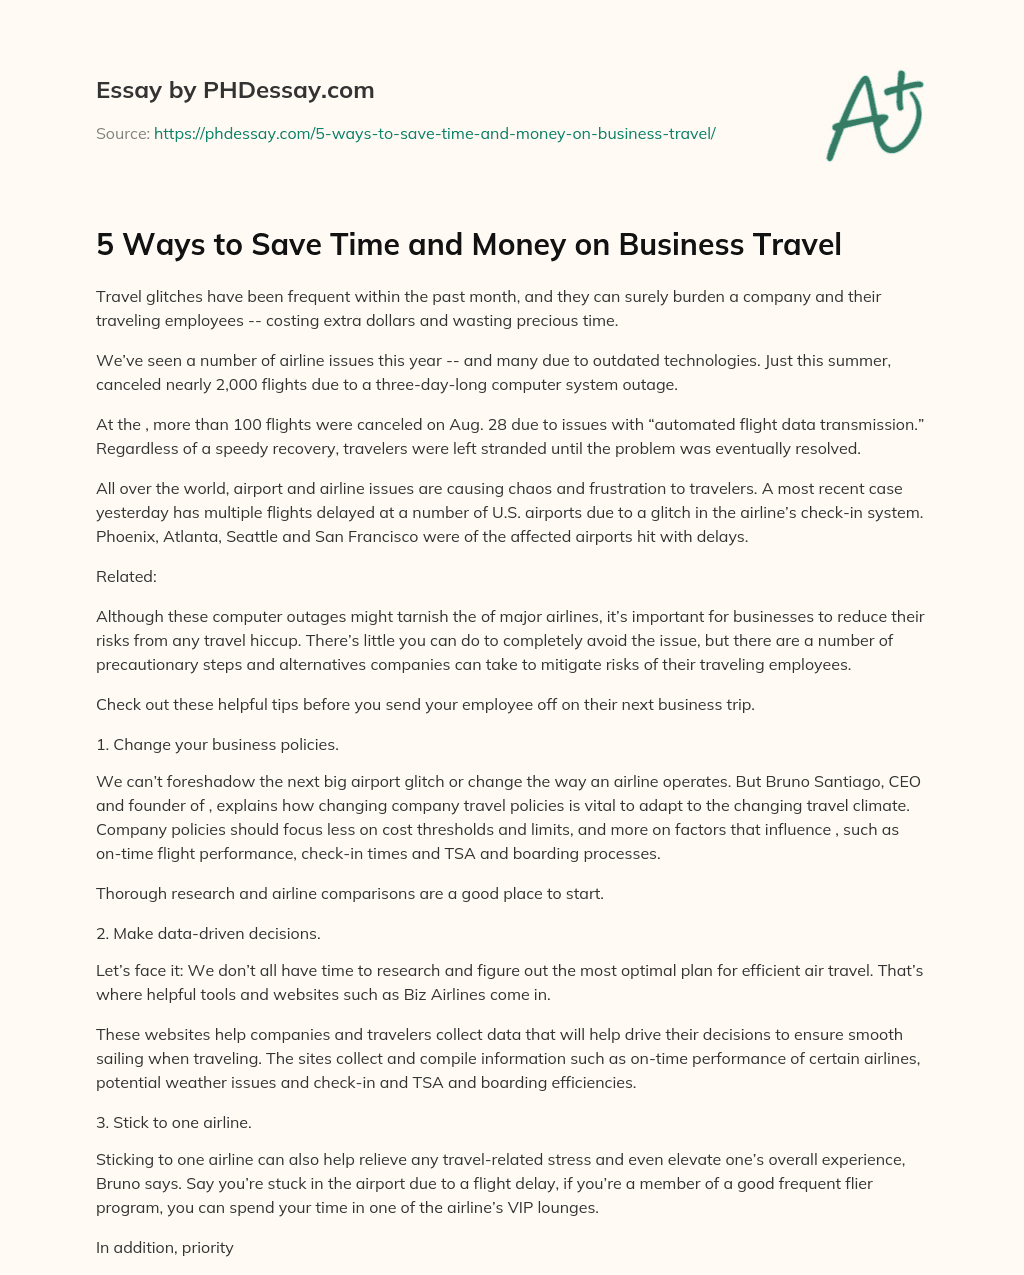 5 Ways to Save Time and Money on Business Travel essay